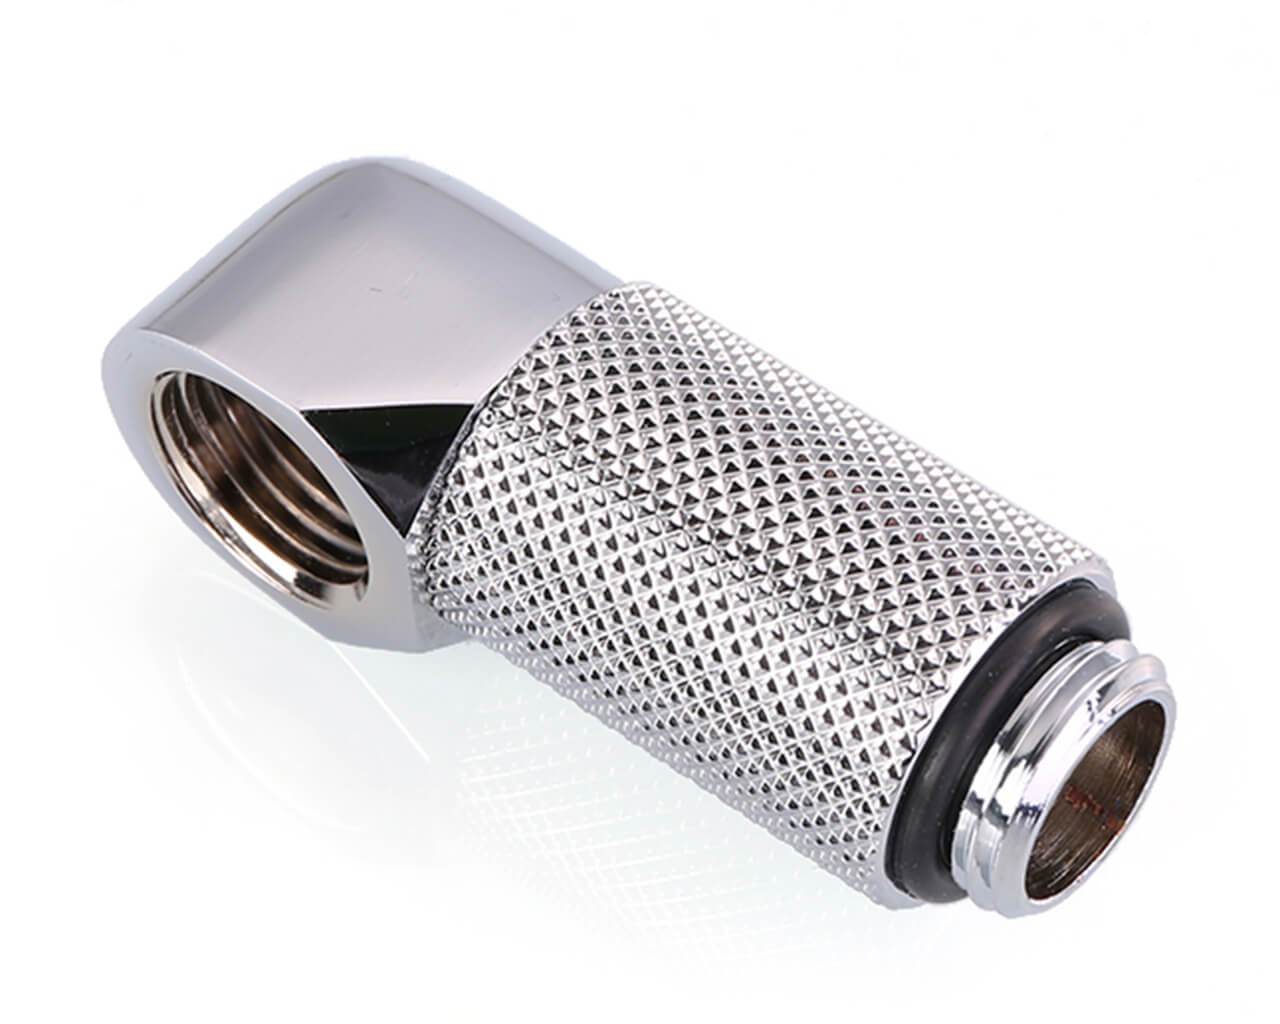 Bykski G 1/4in. Male to Female 90 Degree Rotary 25mm Extension Elbow Fitting (B-RD90-EXJ25) - PrimoChill - KEEPING IT COOL Silver